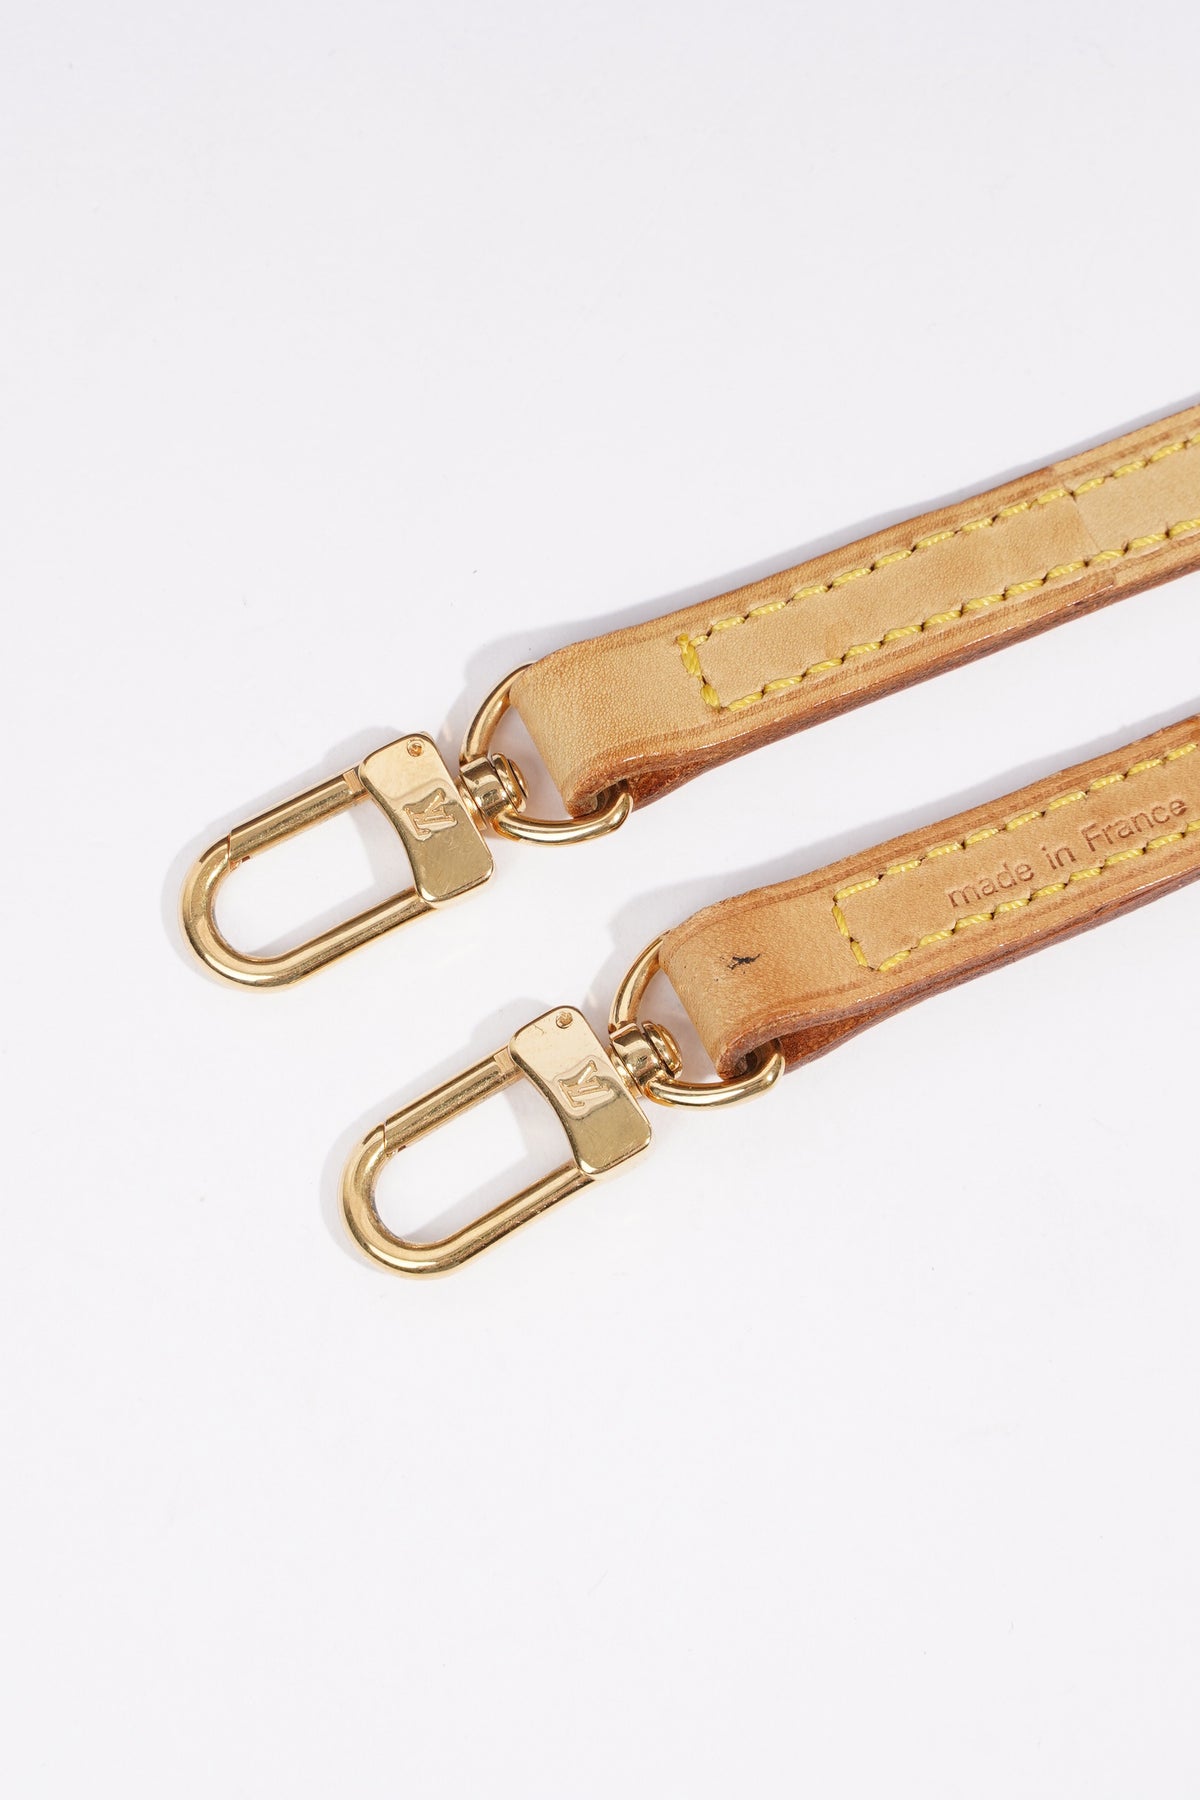 Louis Vuitton Bandouliere Strap White / Black Leather – Luxe Collective